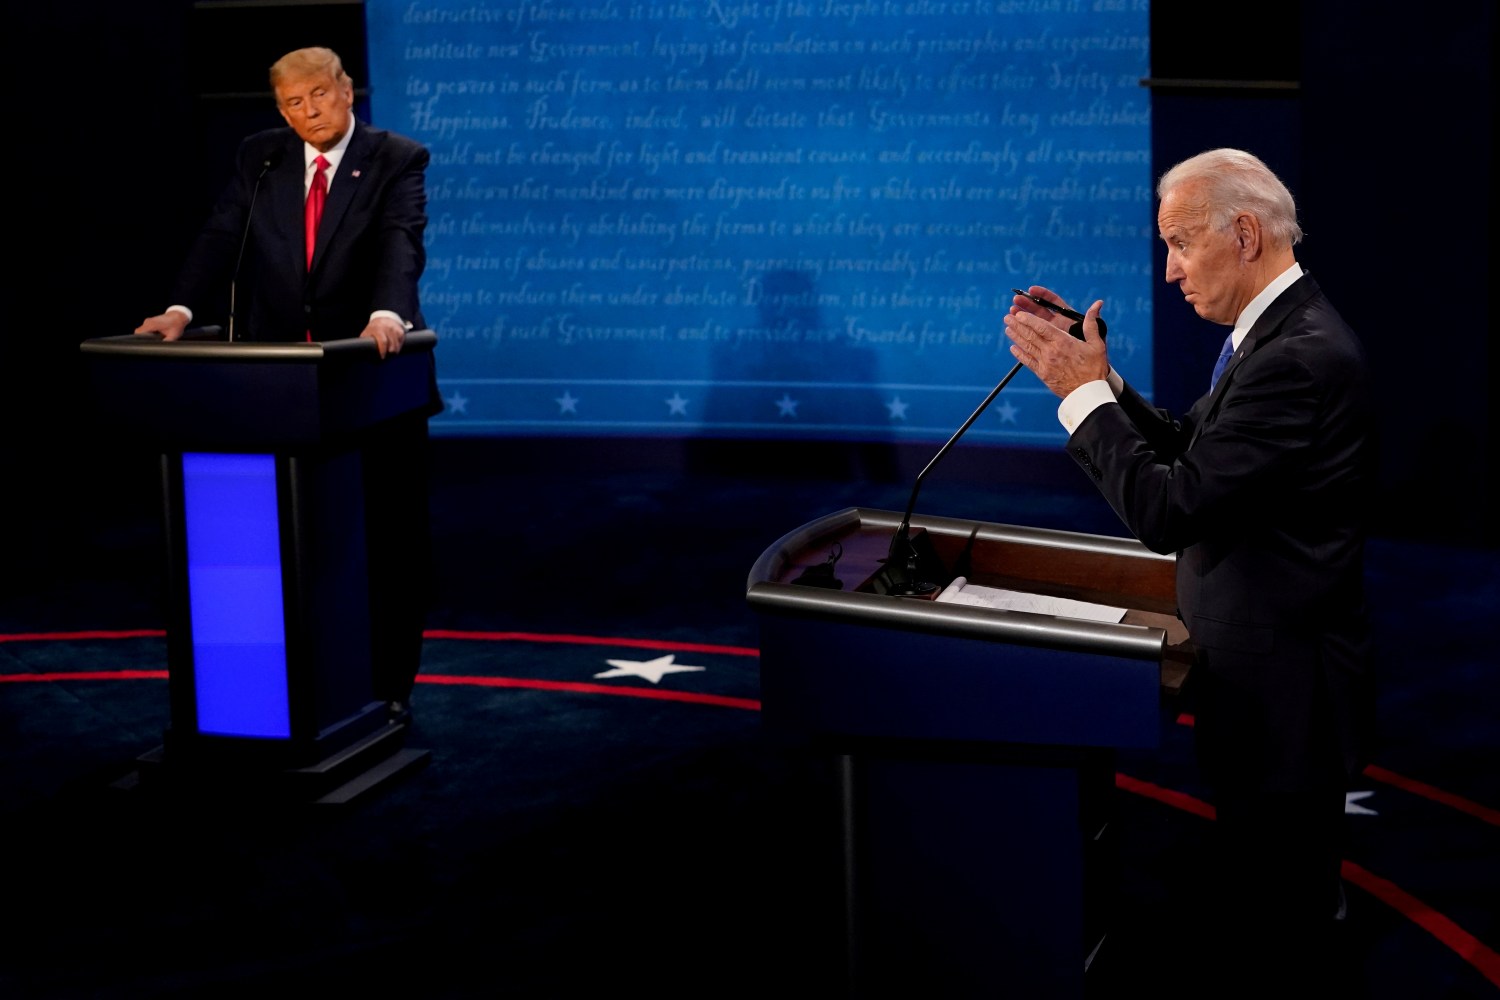 FILE PHOTO: Democratic presidential candidate former Vice President Joe Biden answers a question as President Donald Trump listens during the second and final presidential debate at the Curb Event Center at Belmont University in Nashville, Tennessee, U.S., October 22, 2020. Morry Gash/Pool via REUTERS/File Photo